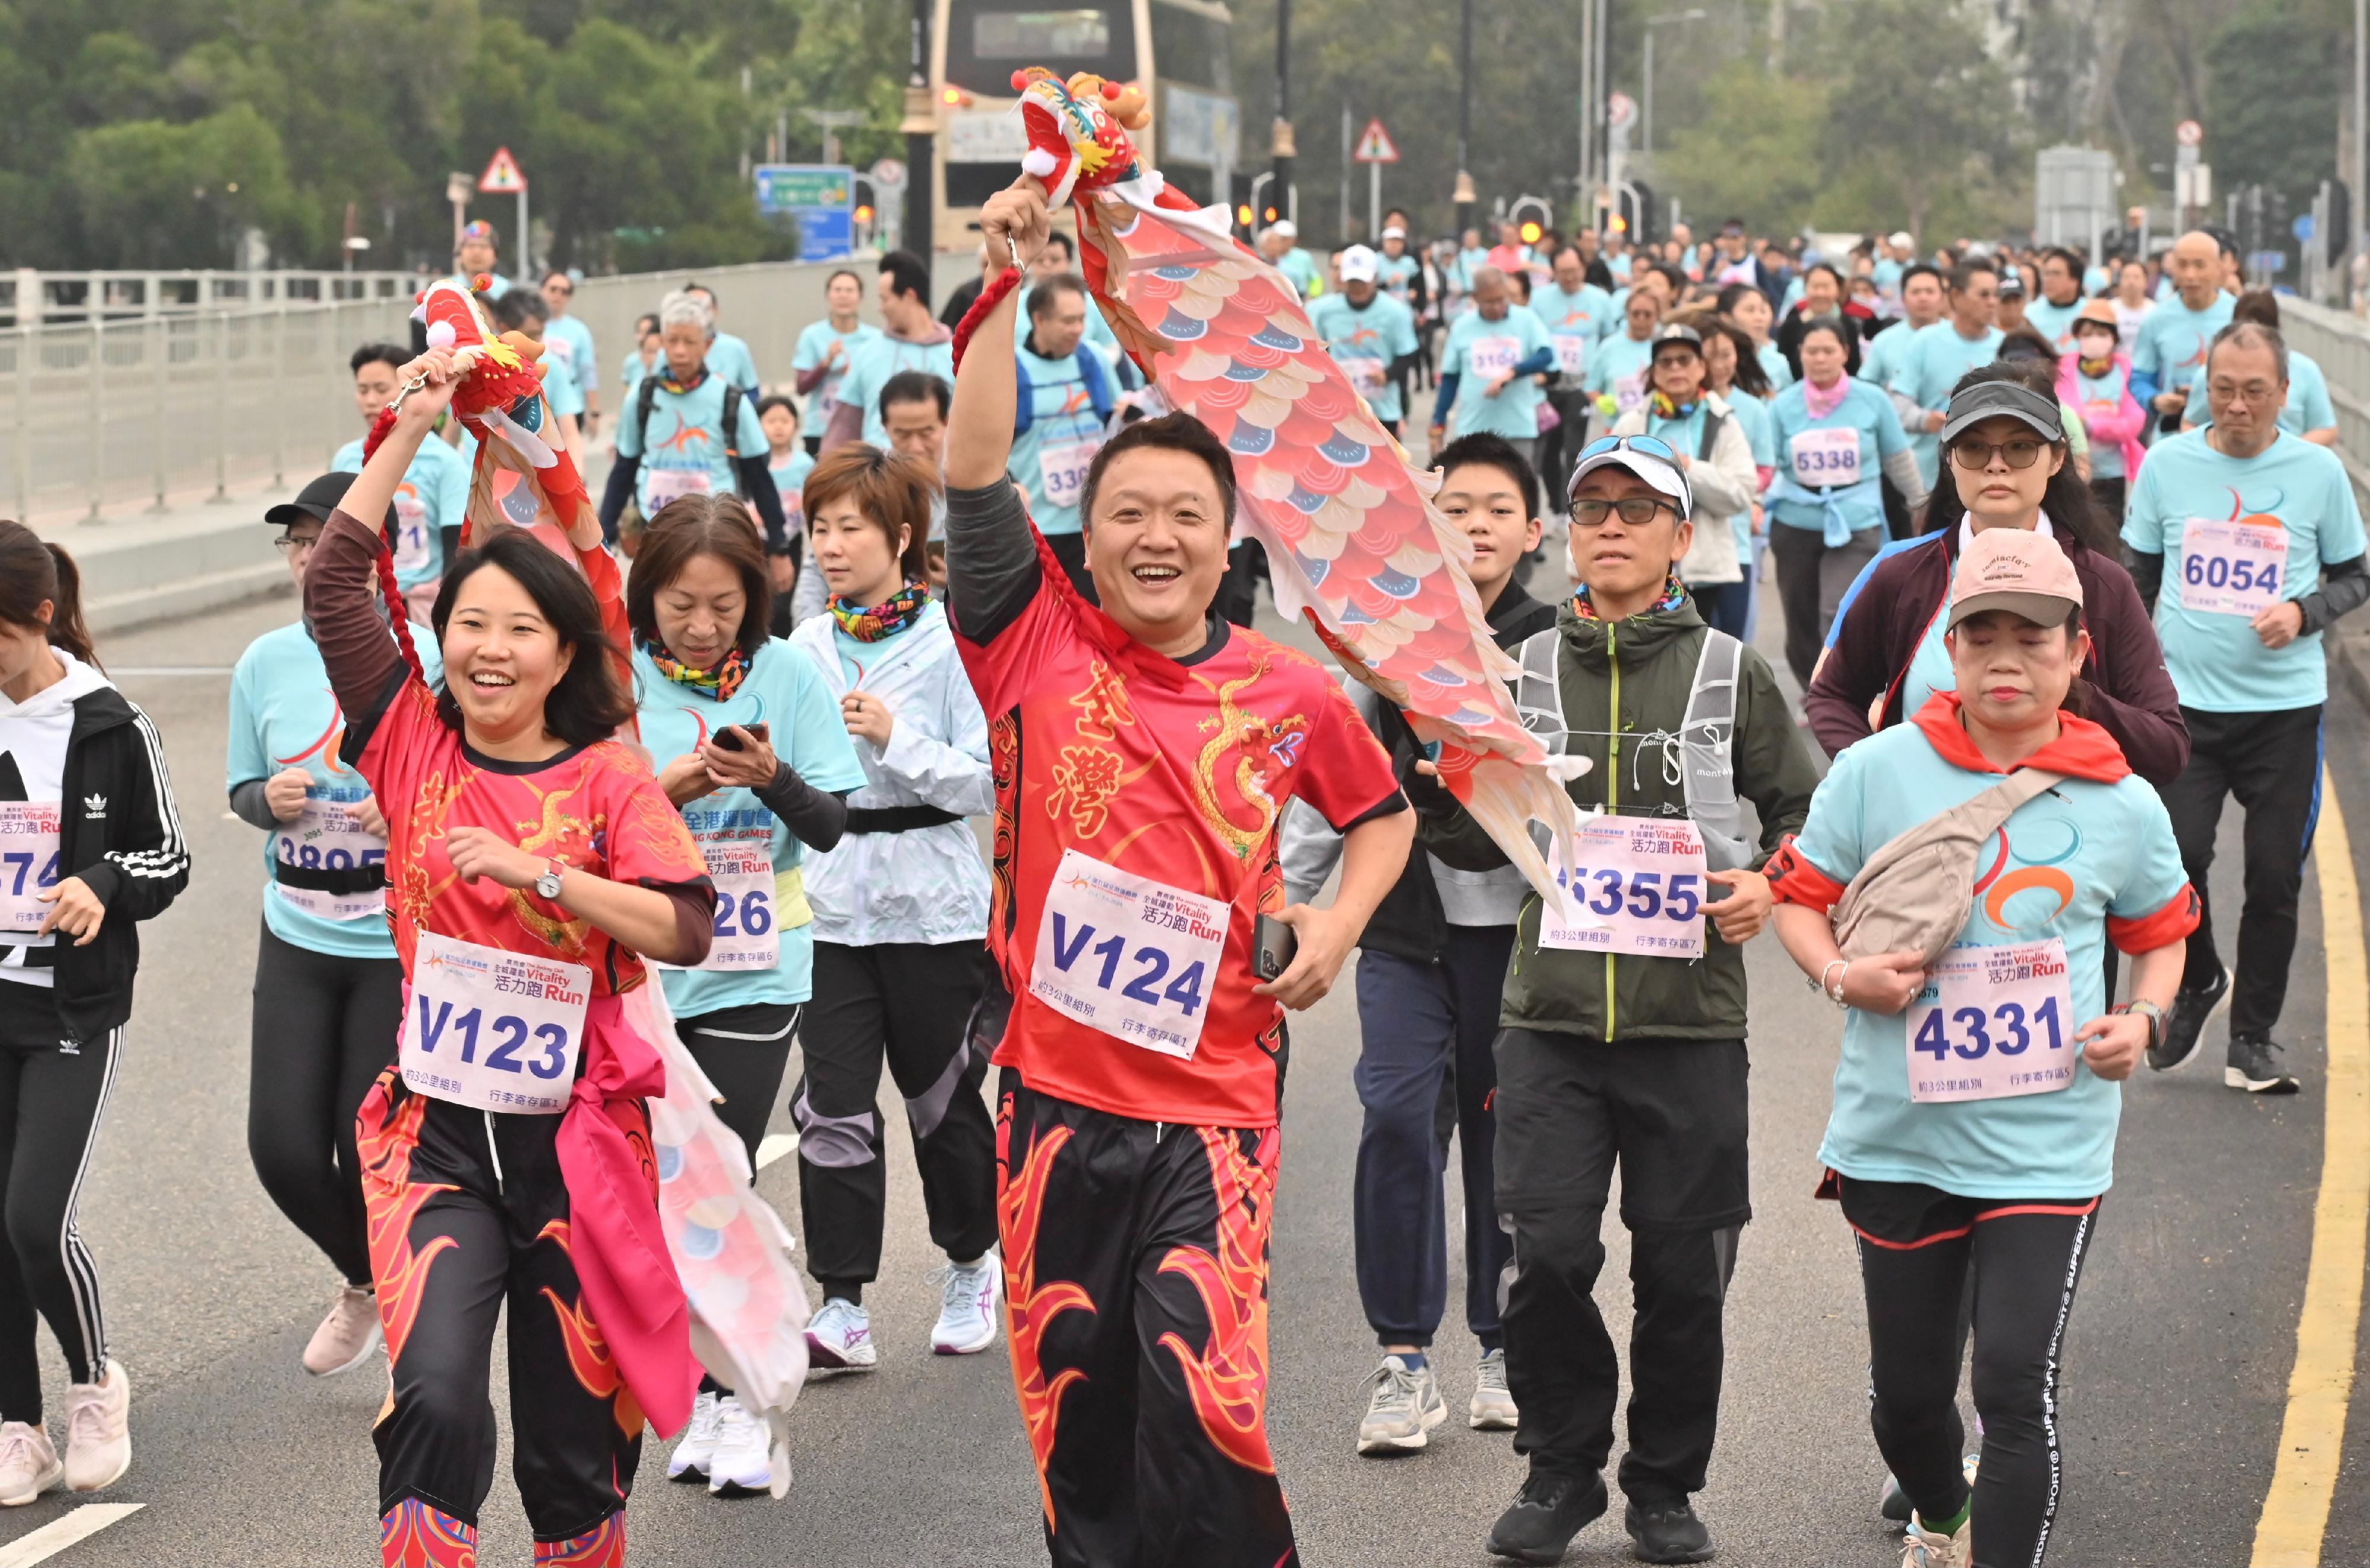 The 9th Hong Kong Games' Jockey Club Vitality Run was held alongside the Shing Mun River in Sha Tin this morning (March 3). Photo shows people joining the 9th Hong Kong Games' Jockey Club Vitality Run with their families and friends to share the fun of running.
